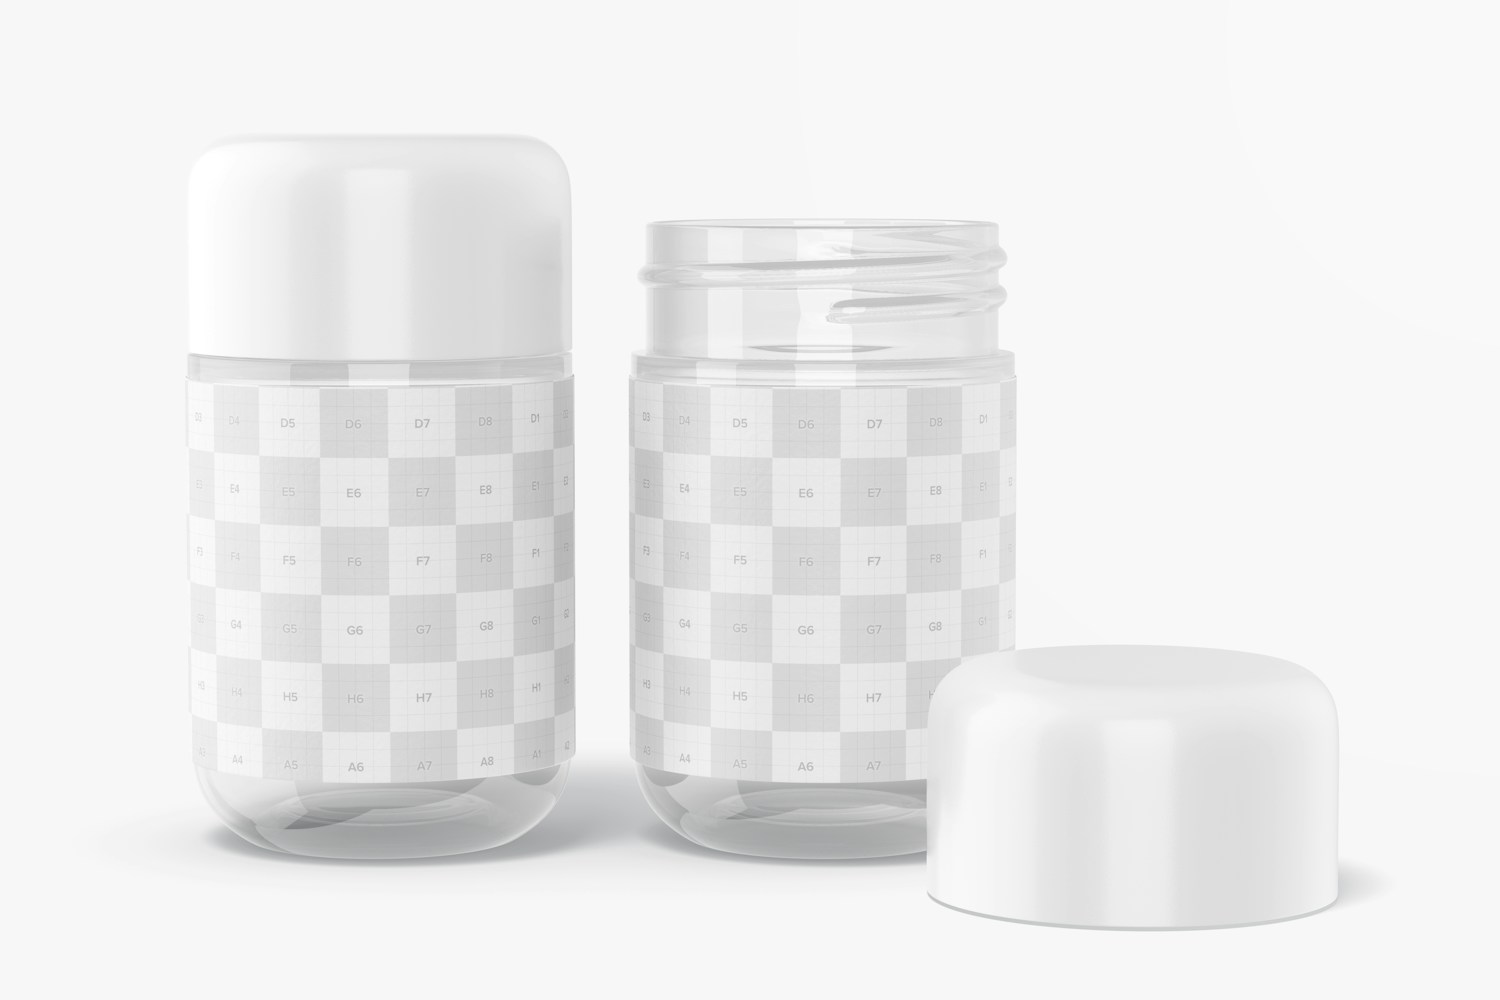 180 ml Clear Glass Jars Mockup, Closed and Opened